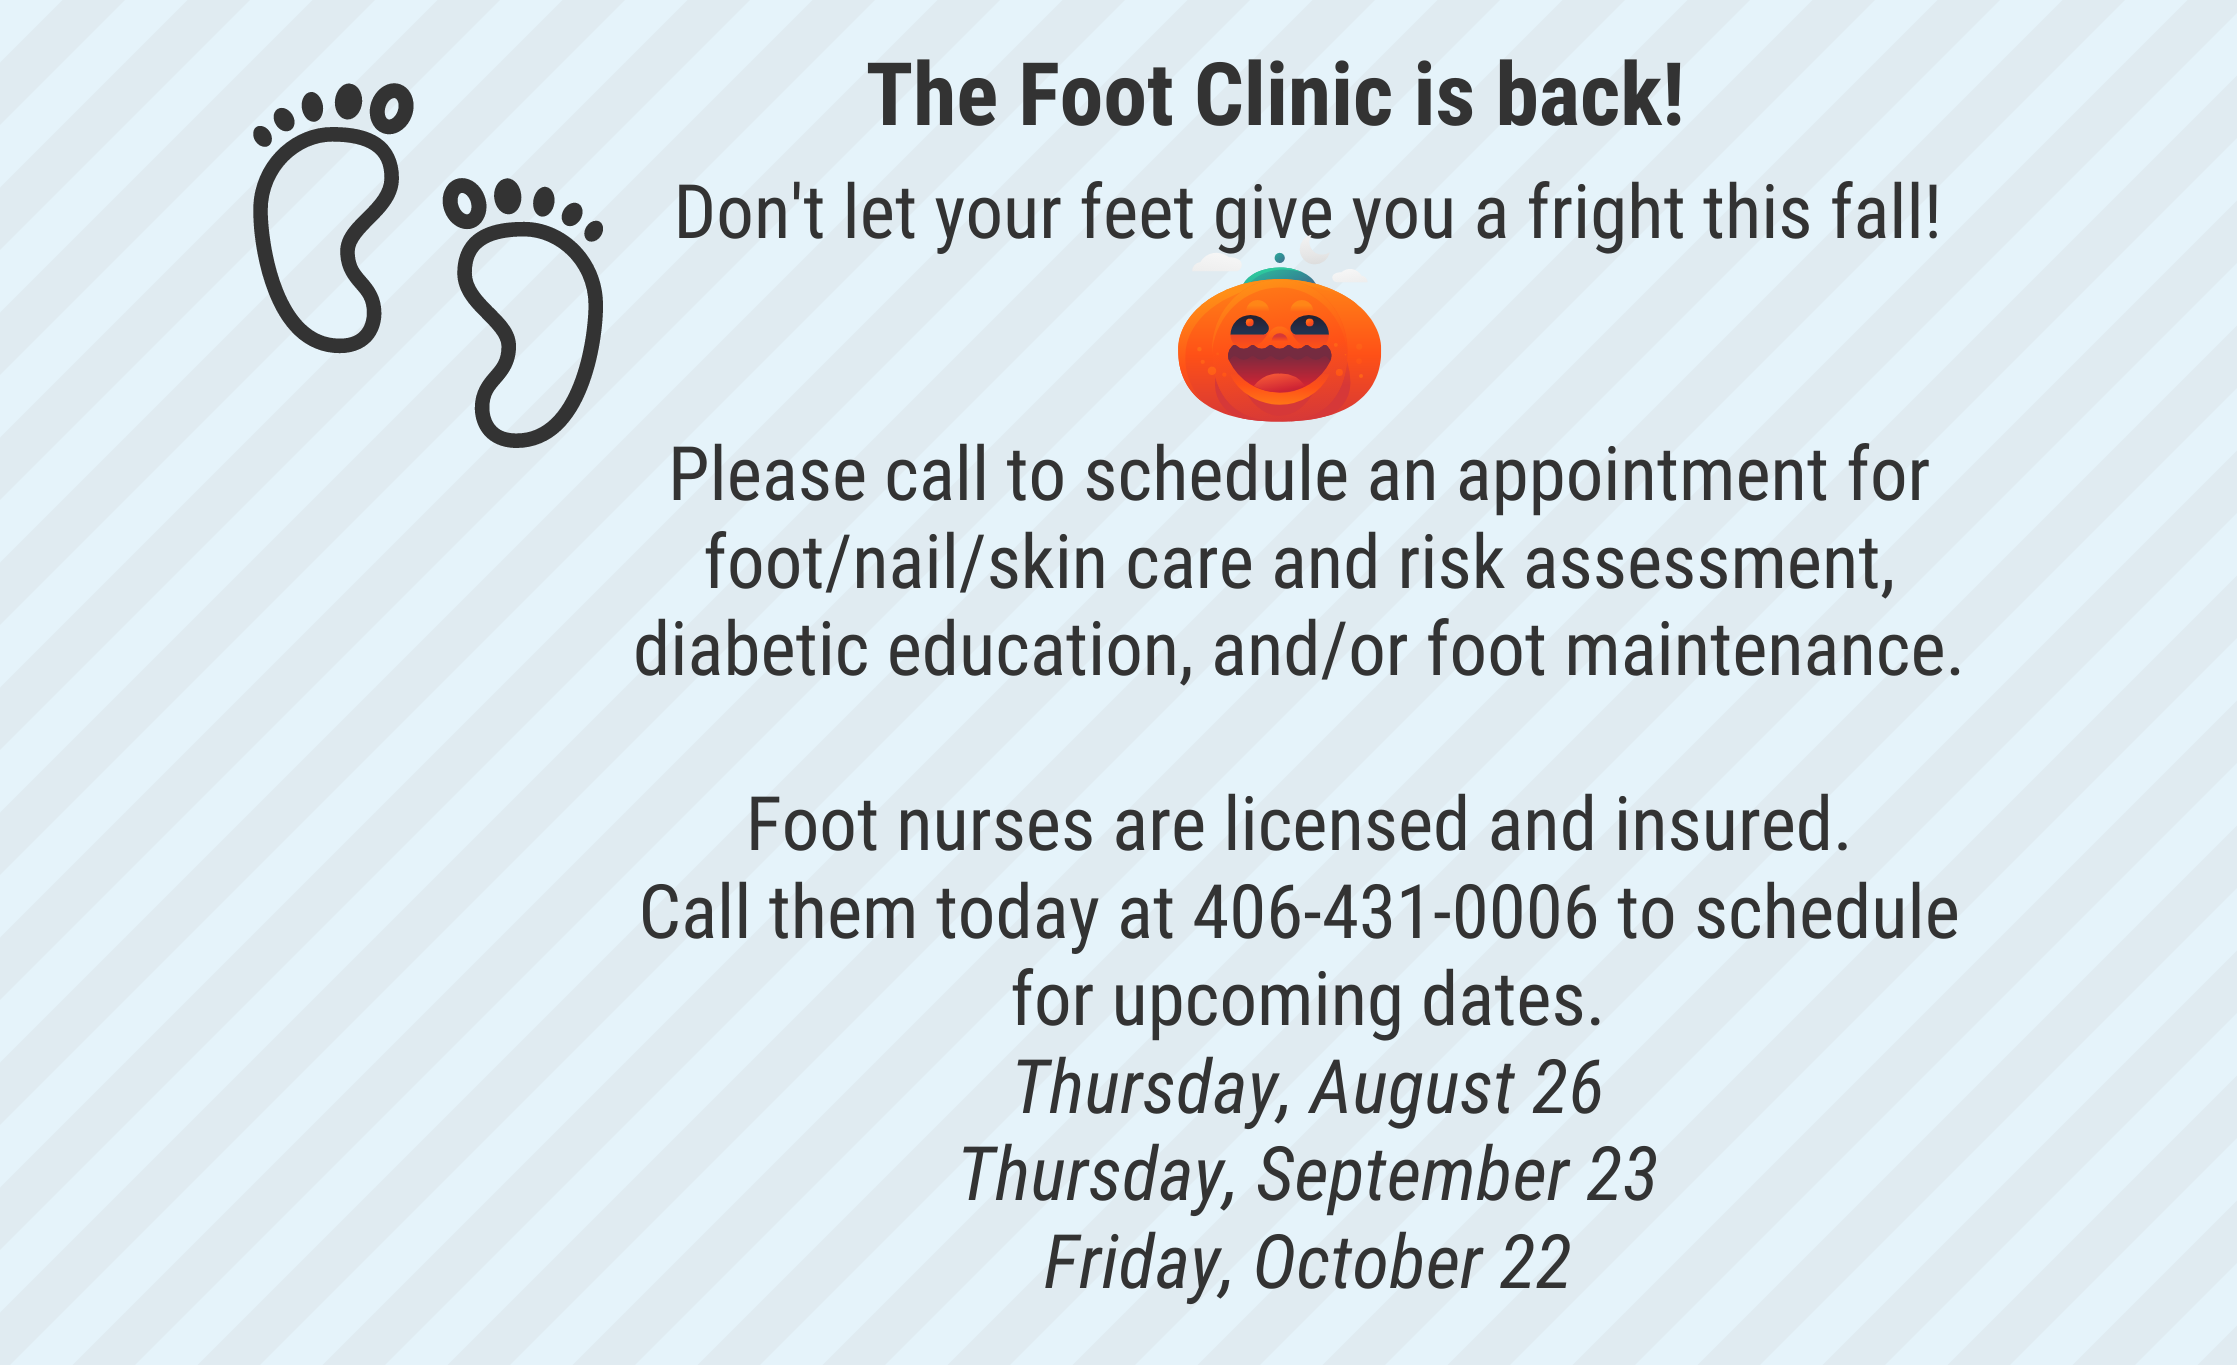 Please call to schedule an appointment for foot/nail/skin care and risk assessment, diabetic education, and/or foot maintenance.